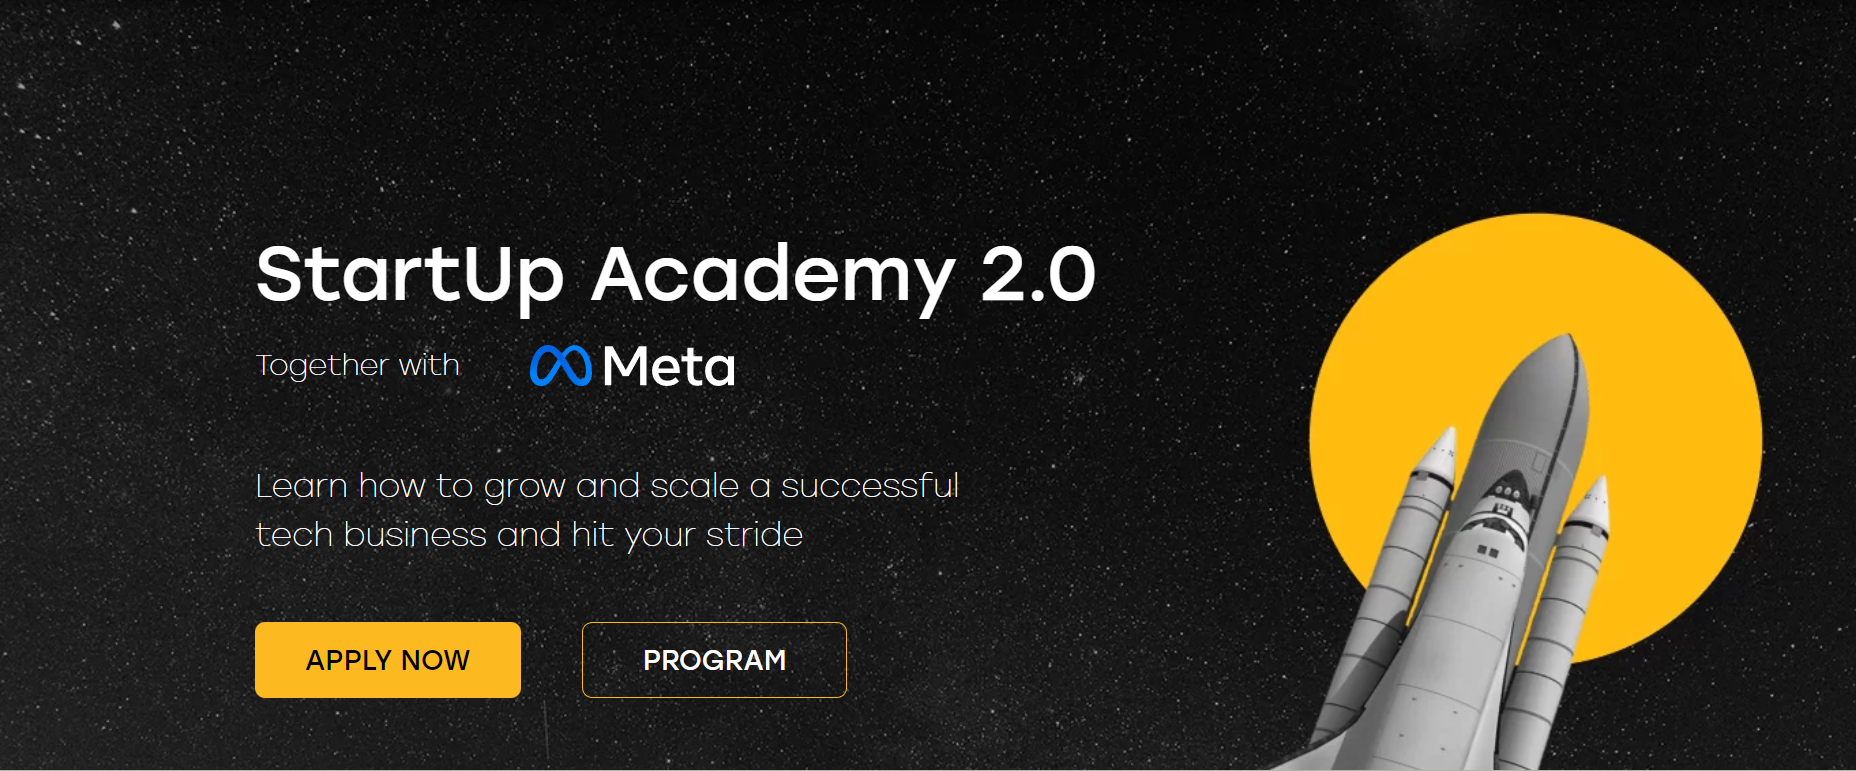 Genesis StartUp Academy together with Meta